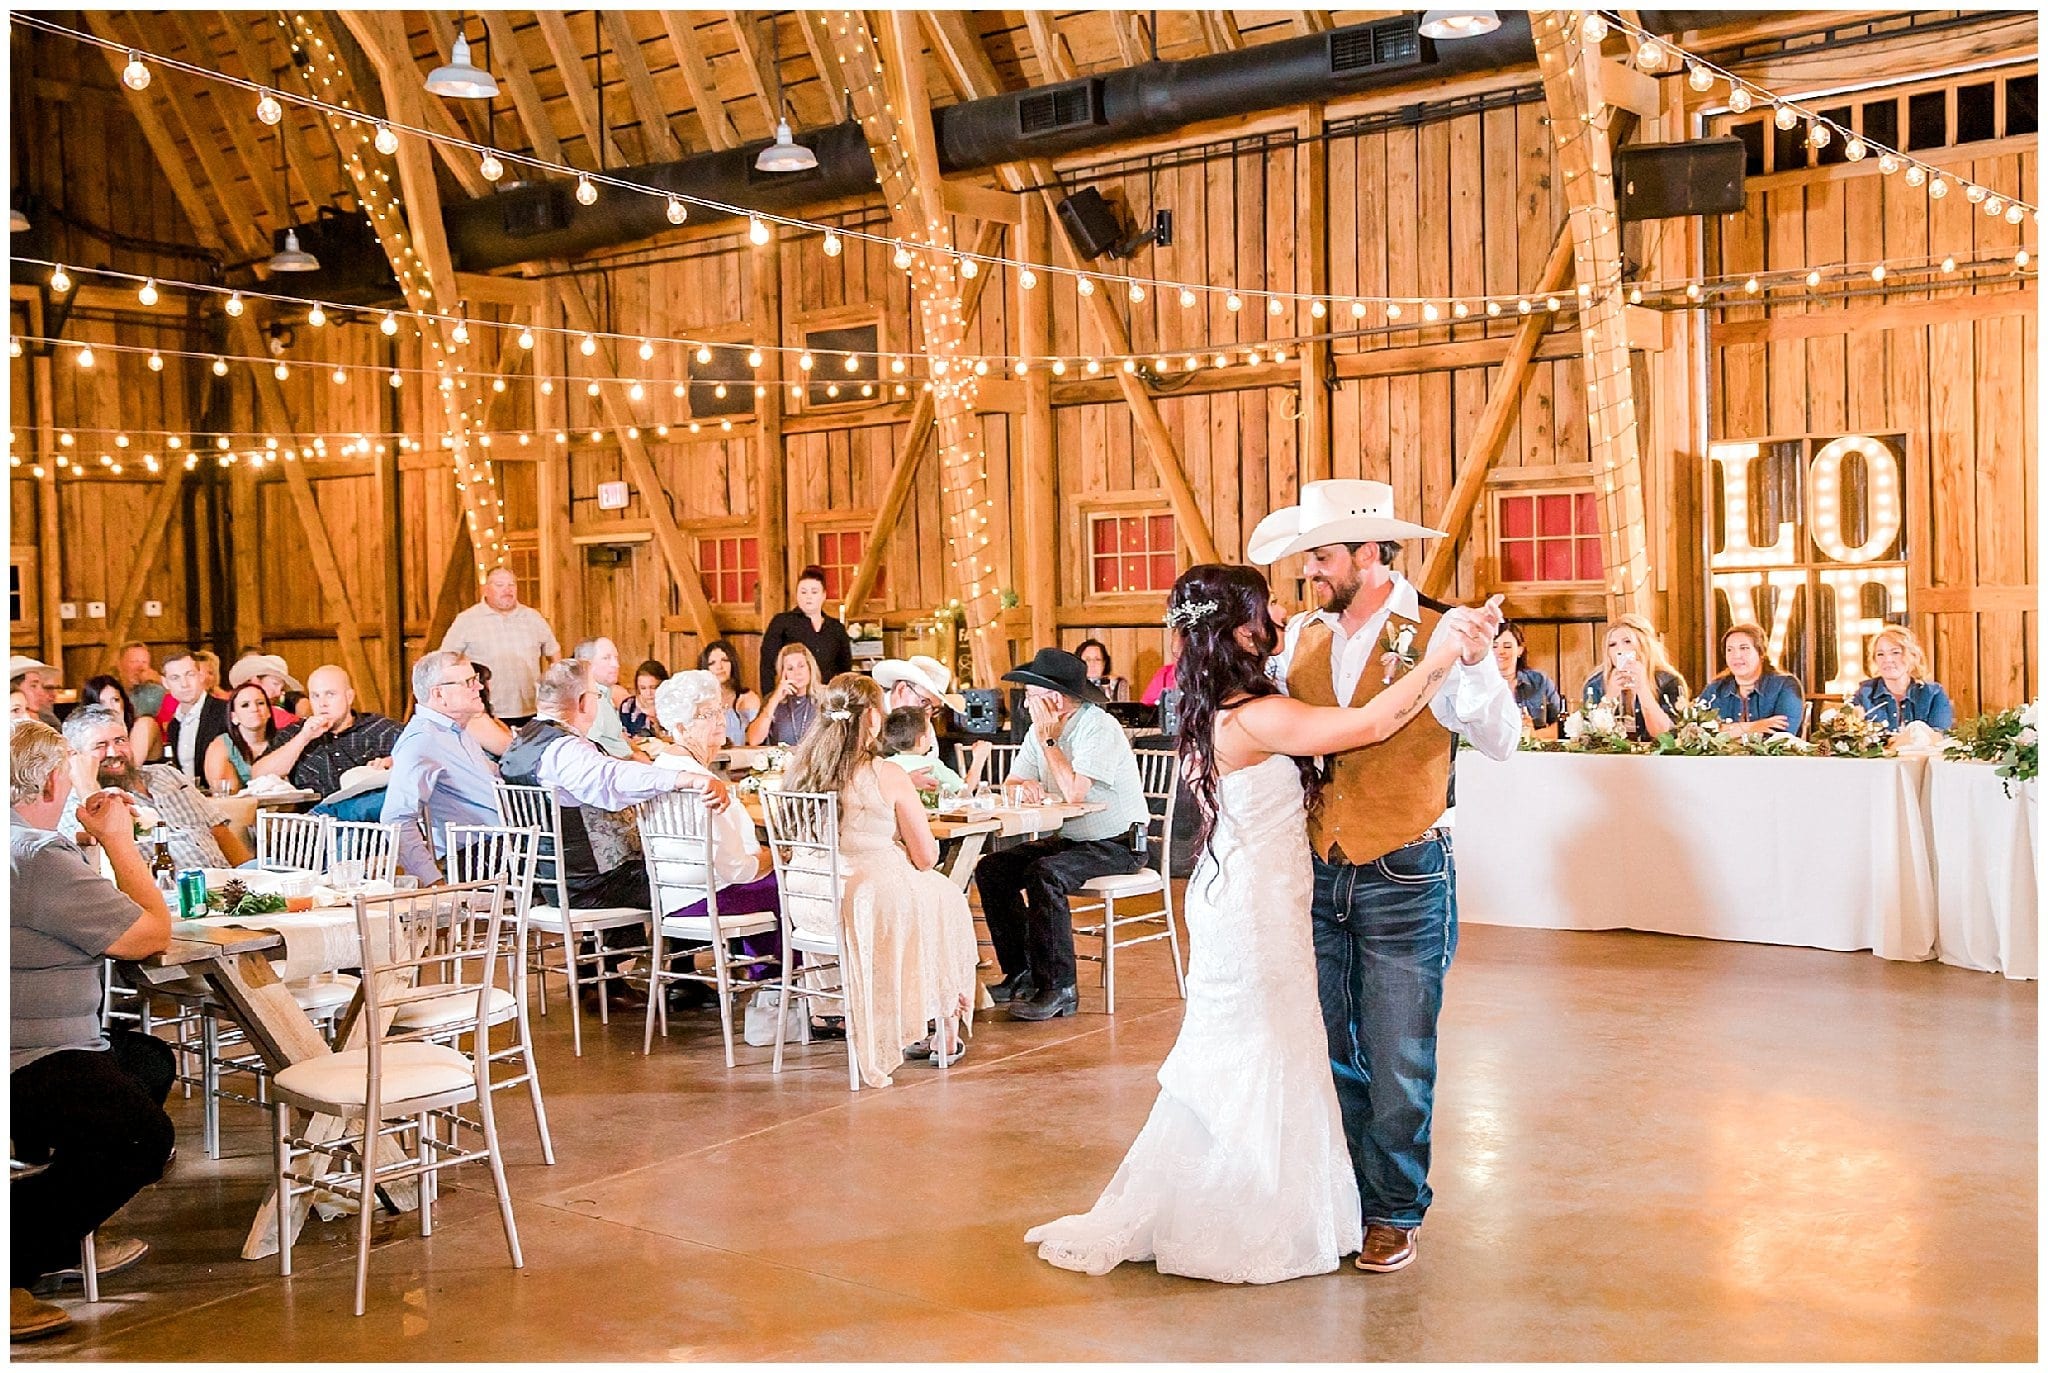 Country Wedding, Boots and Cowboy hats, Barn Wedding, Bride and Groom First Dance